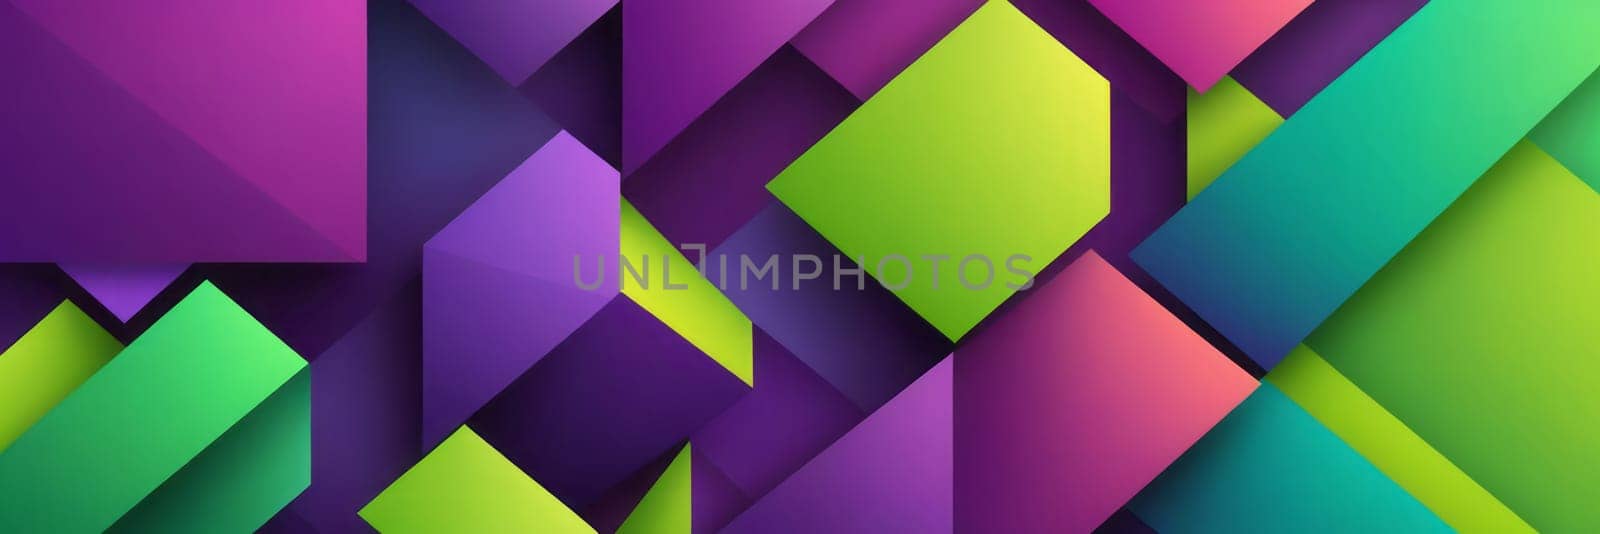 Cubist Shapes in Purple and Lime green by nkotlyar